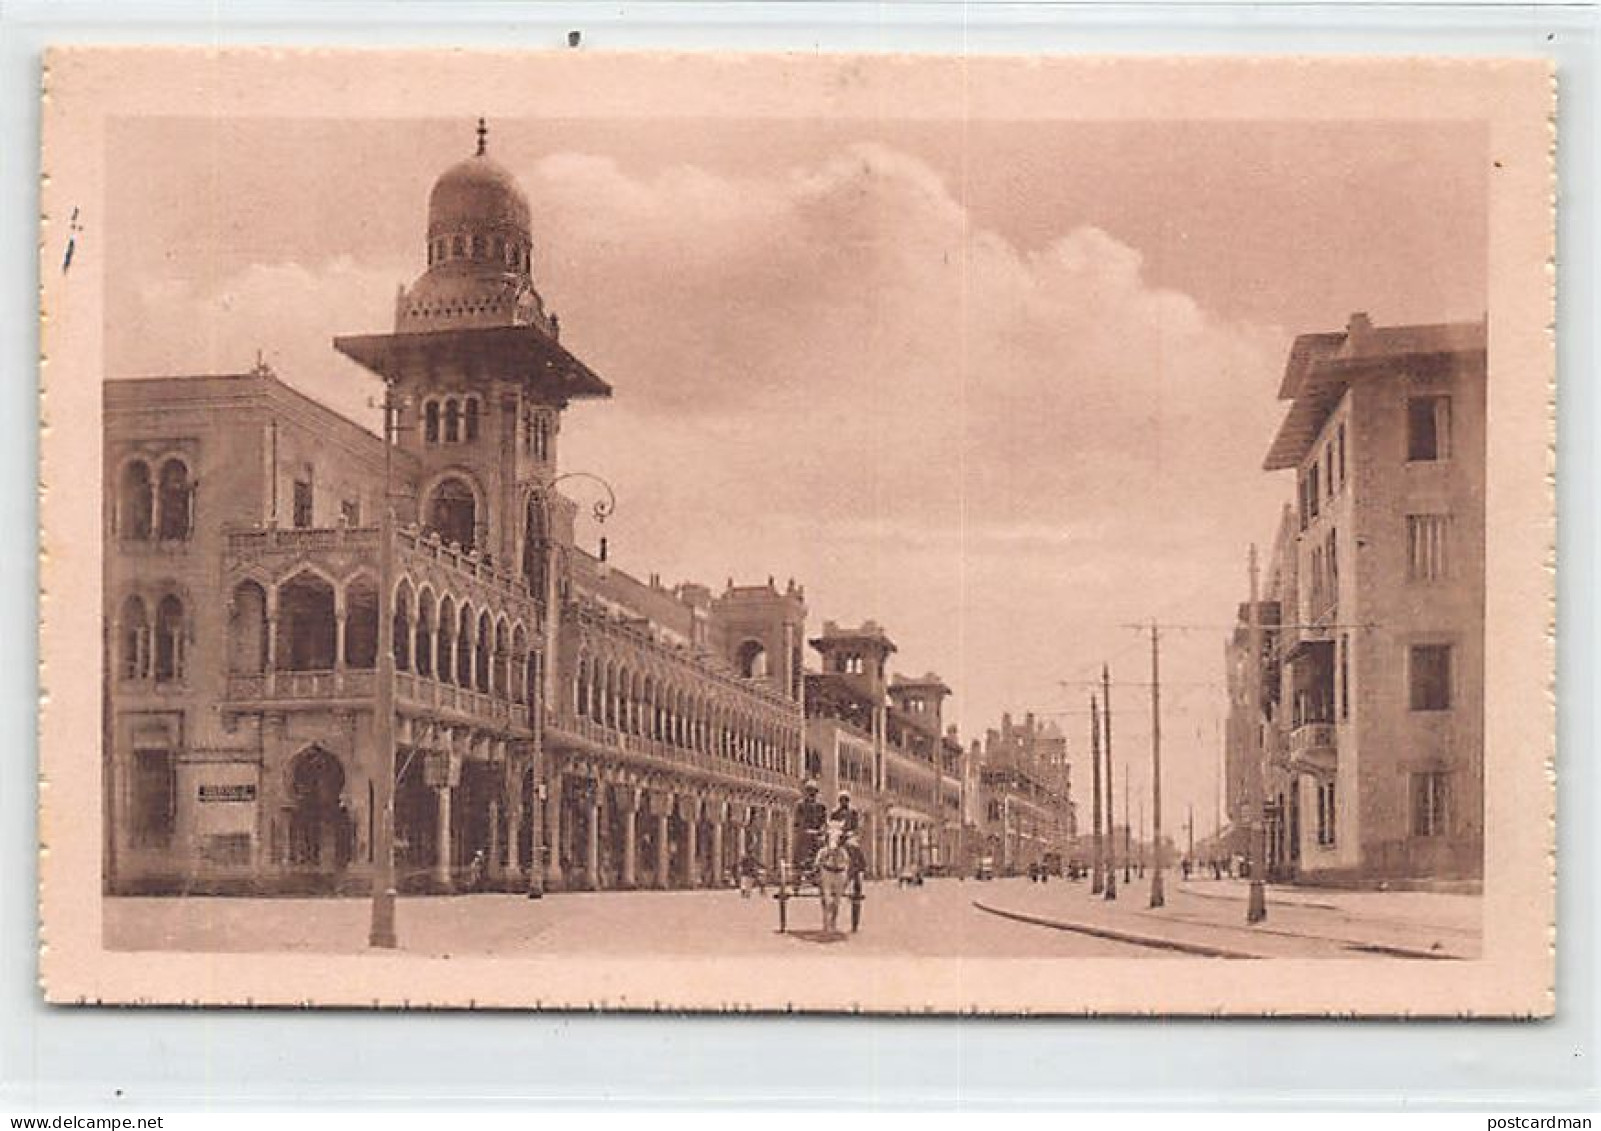 Egypt - HELIOPOLIS - Boulevard Abbas - Publ. R. Livadas & Coutsicos 413 - Other & Unclassified